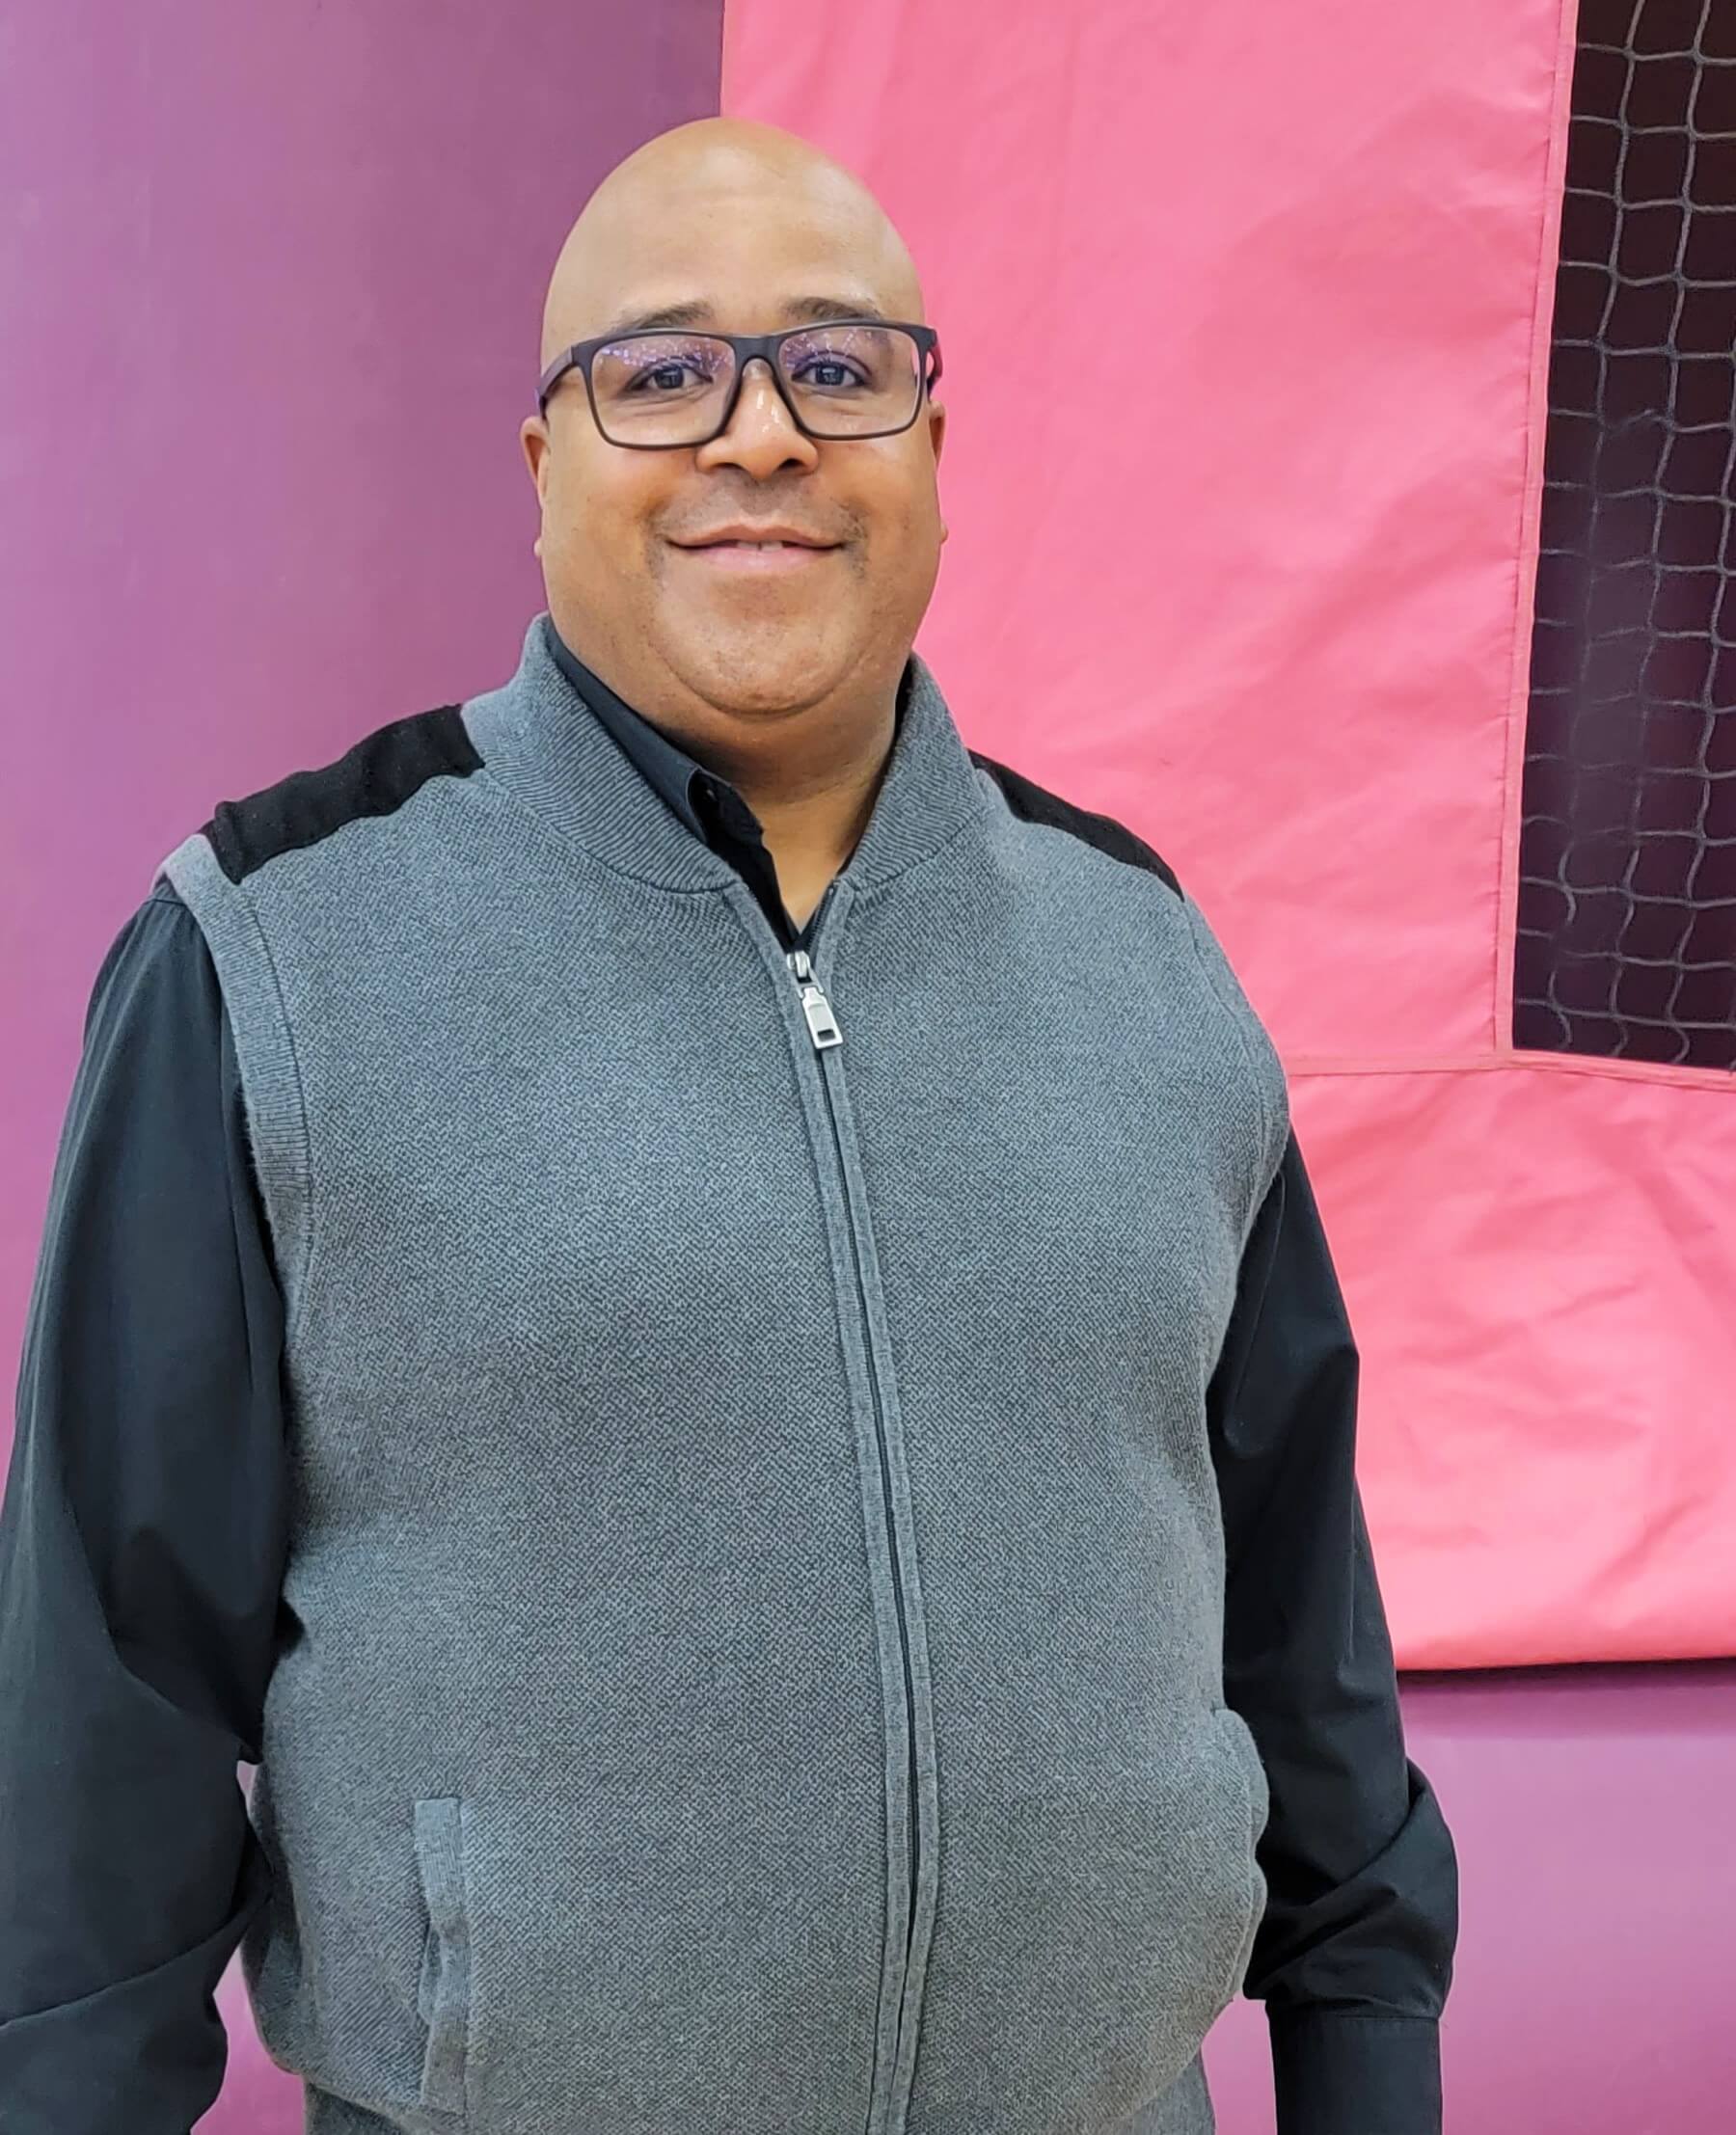 A man wearing glasses and a vest standing in front of a pink trampoline.